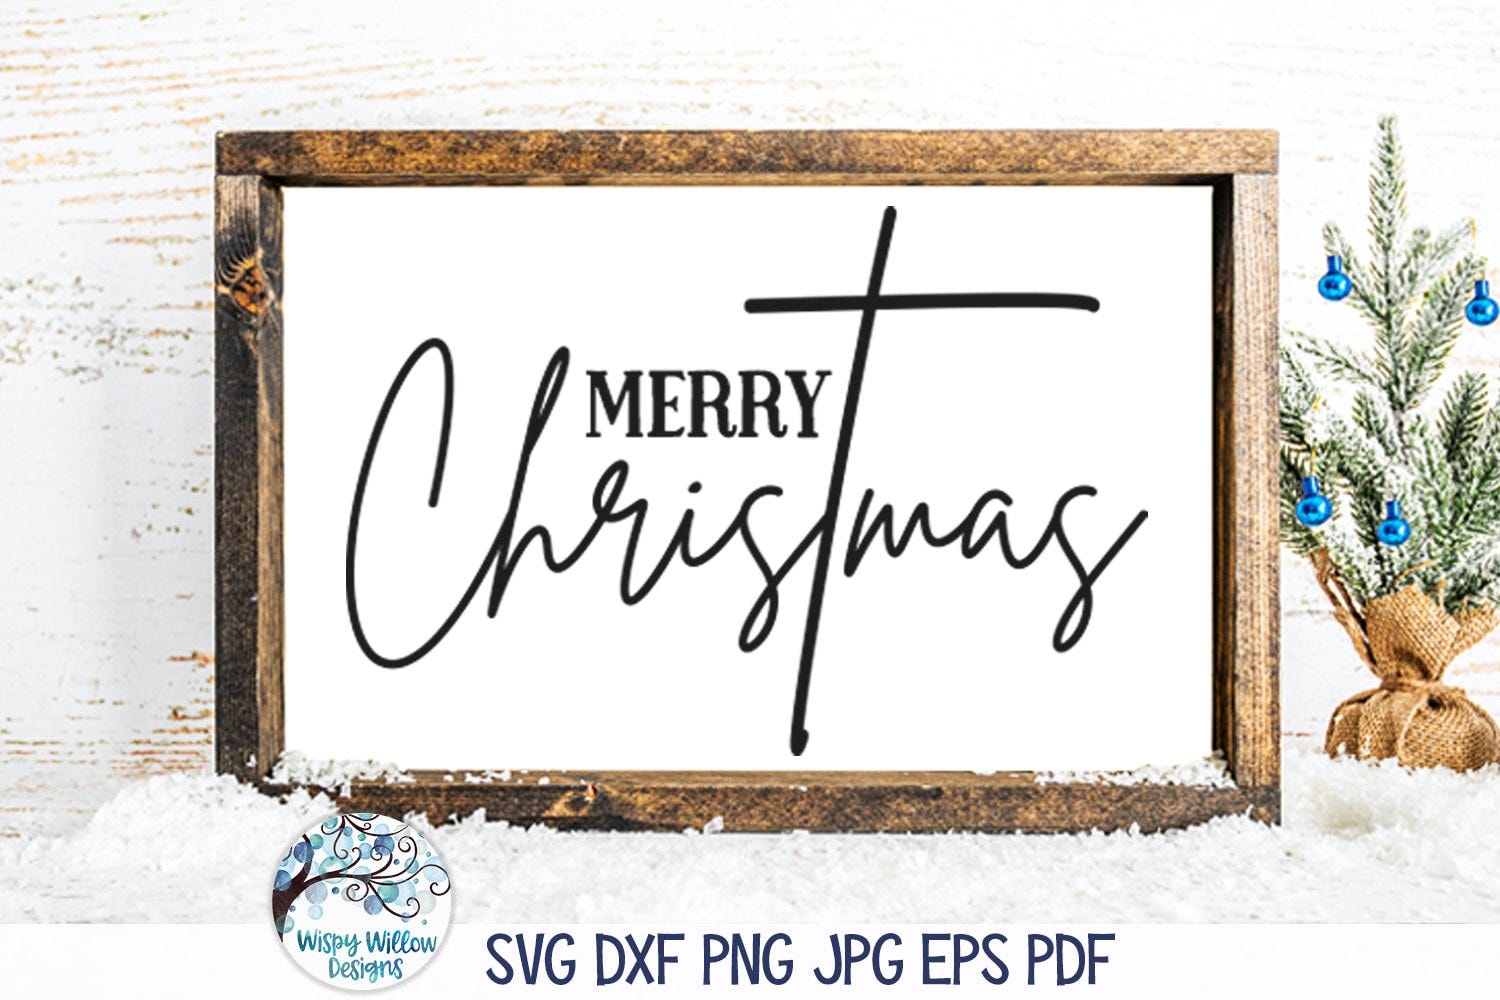 Merry Christmas SVG For Cricut, Religious Christmas Sign, Christmas with Jesus Cross, Christmas Cross PNG Printable, Vinyl Decal Cut File